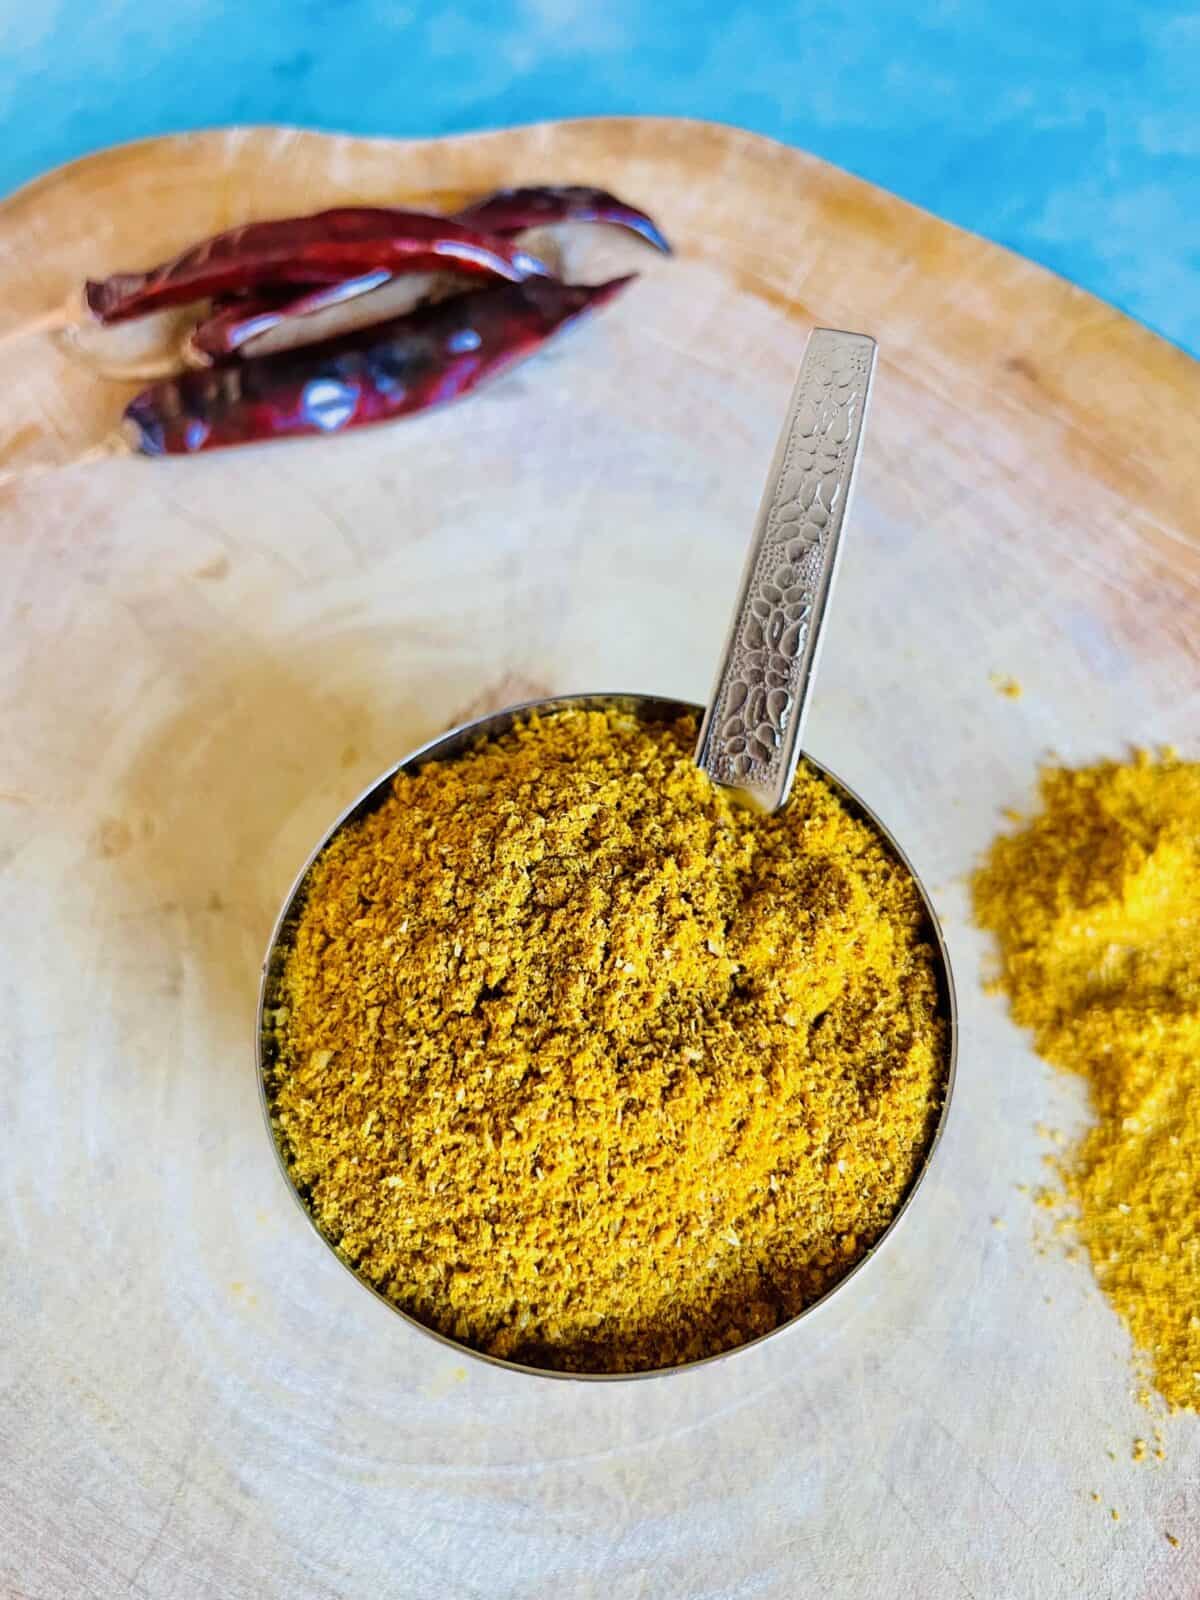 Mauritian curry powder in stainless steel bowl with a spoon.